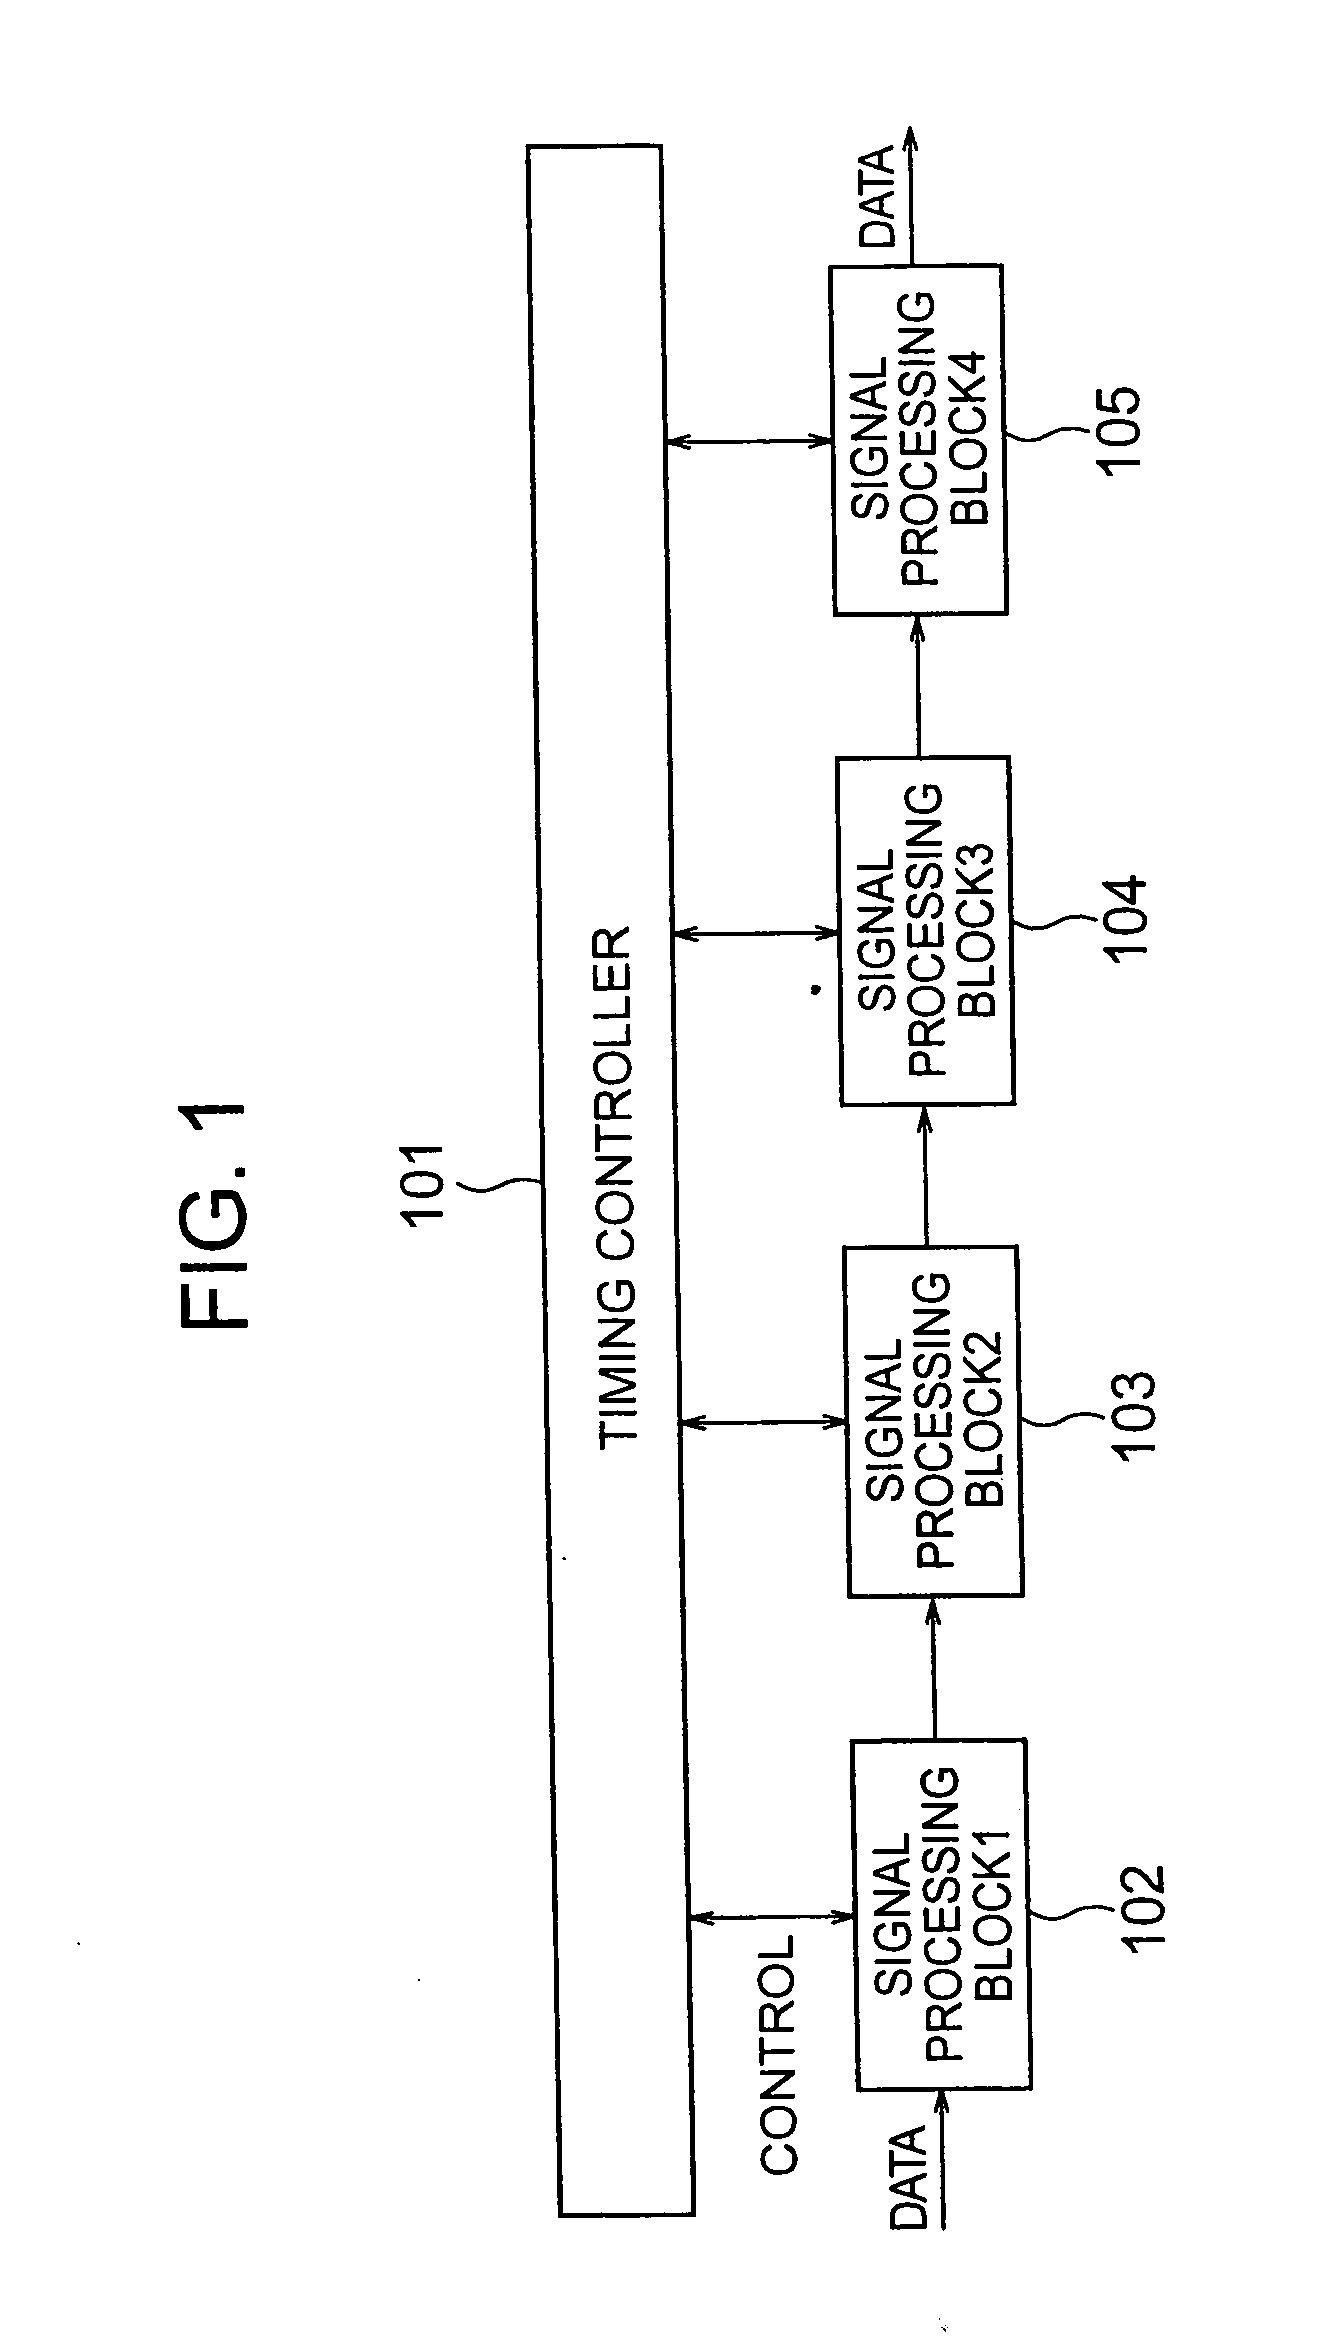 Software defined radio and library configuration therefor